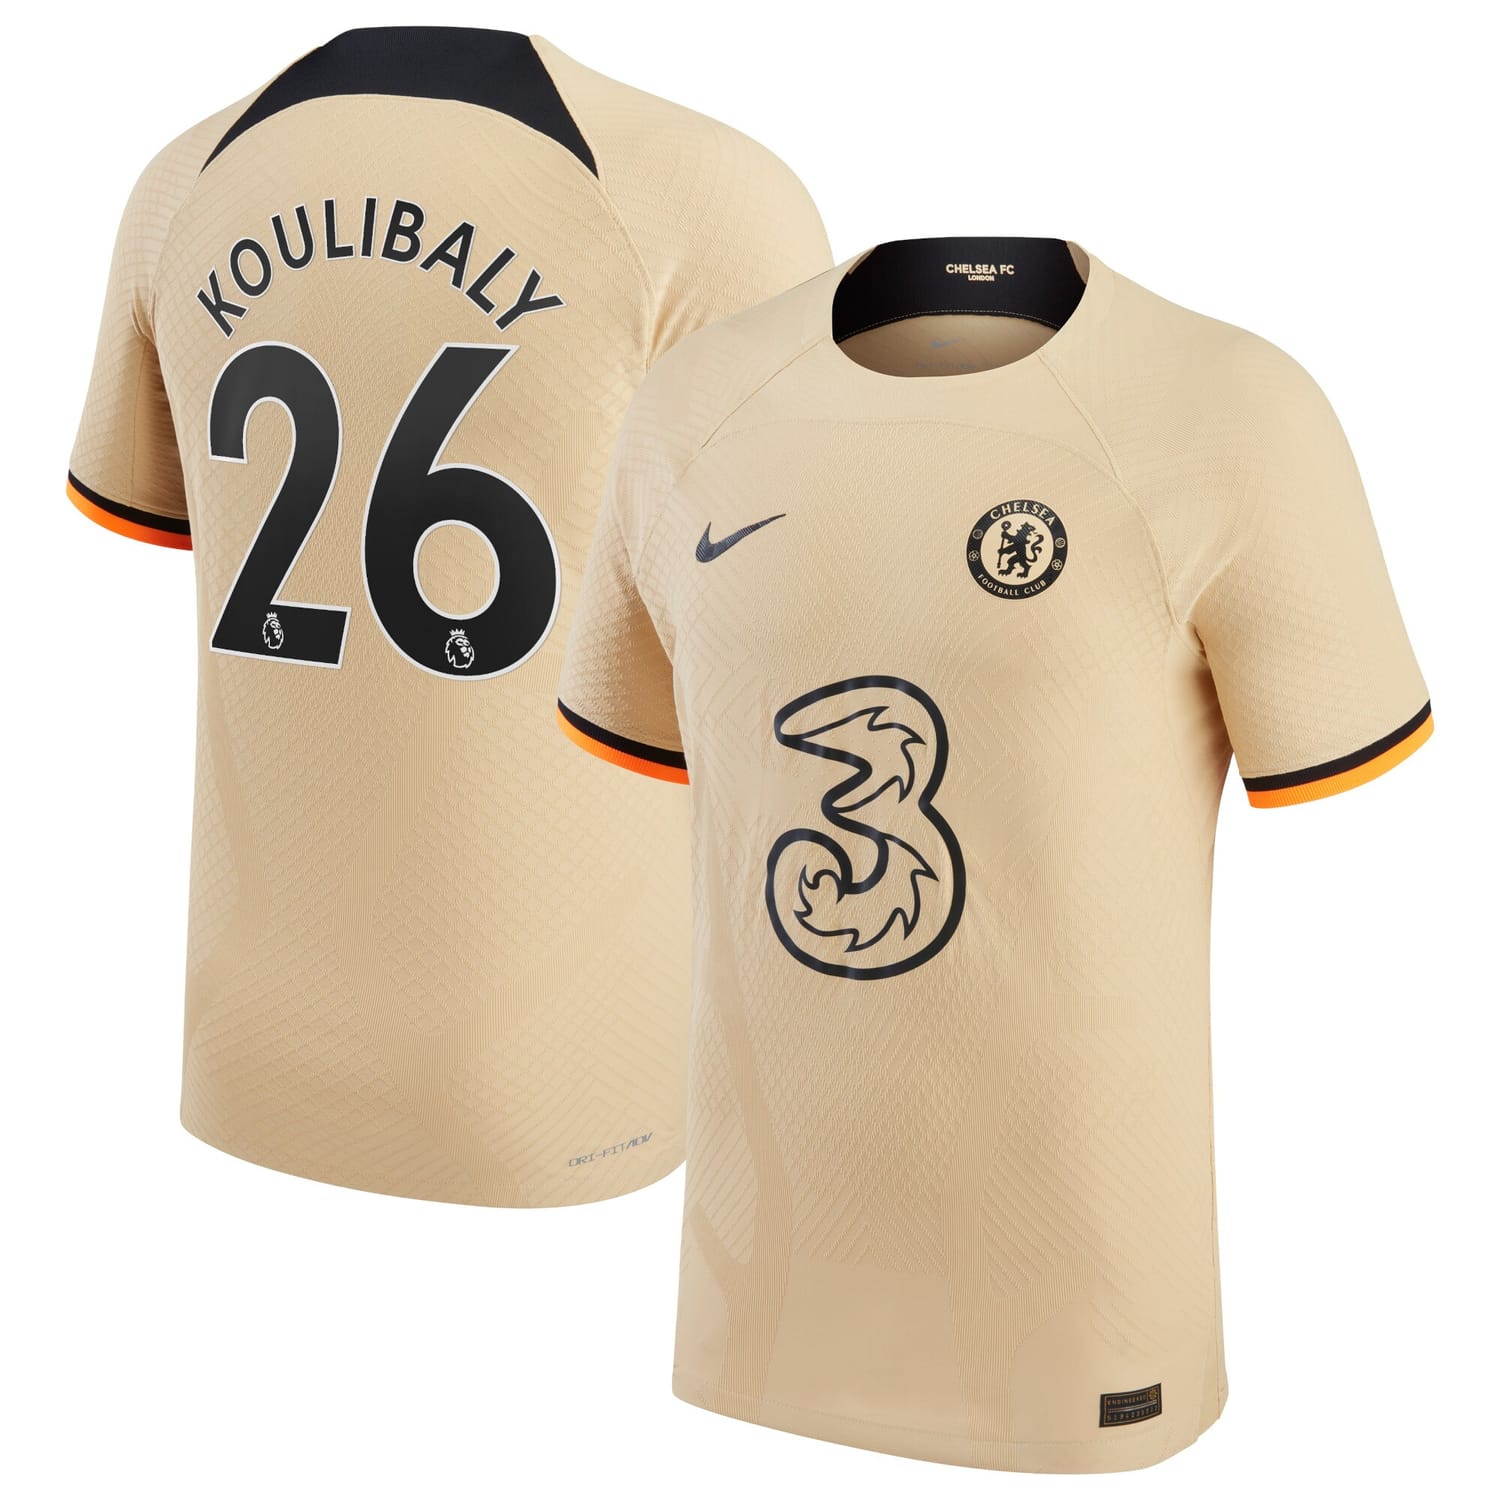 Premier League Chelsea Third Authentic Jersey Shirt 2022-23 player Kalidou Koulibaly 26 printing for Men